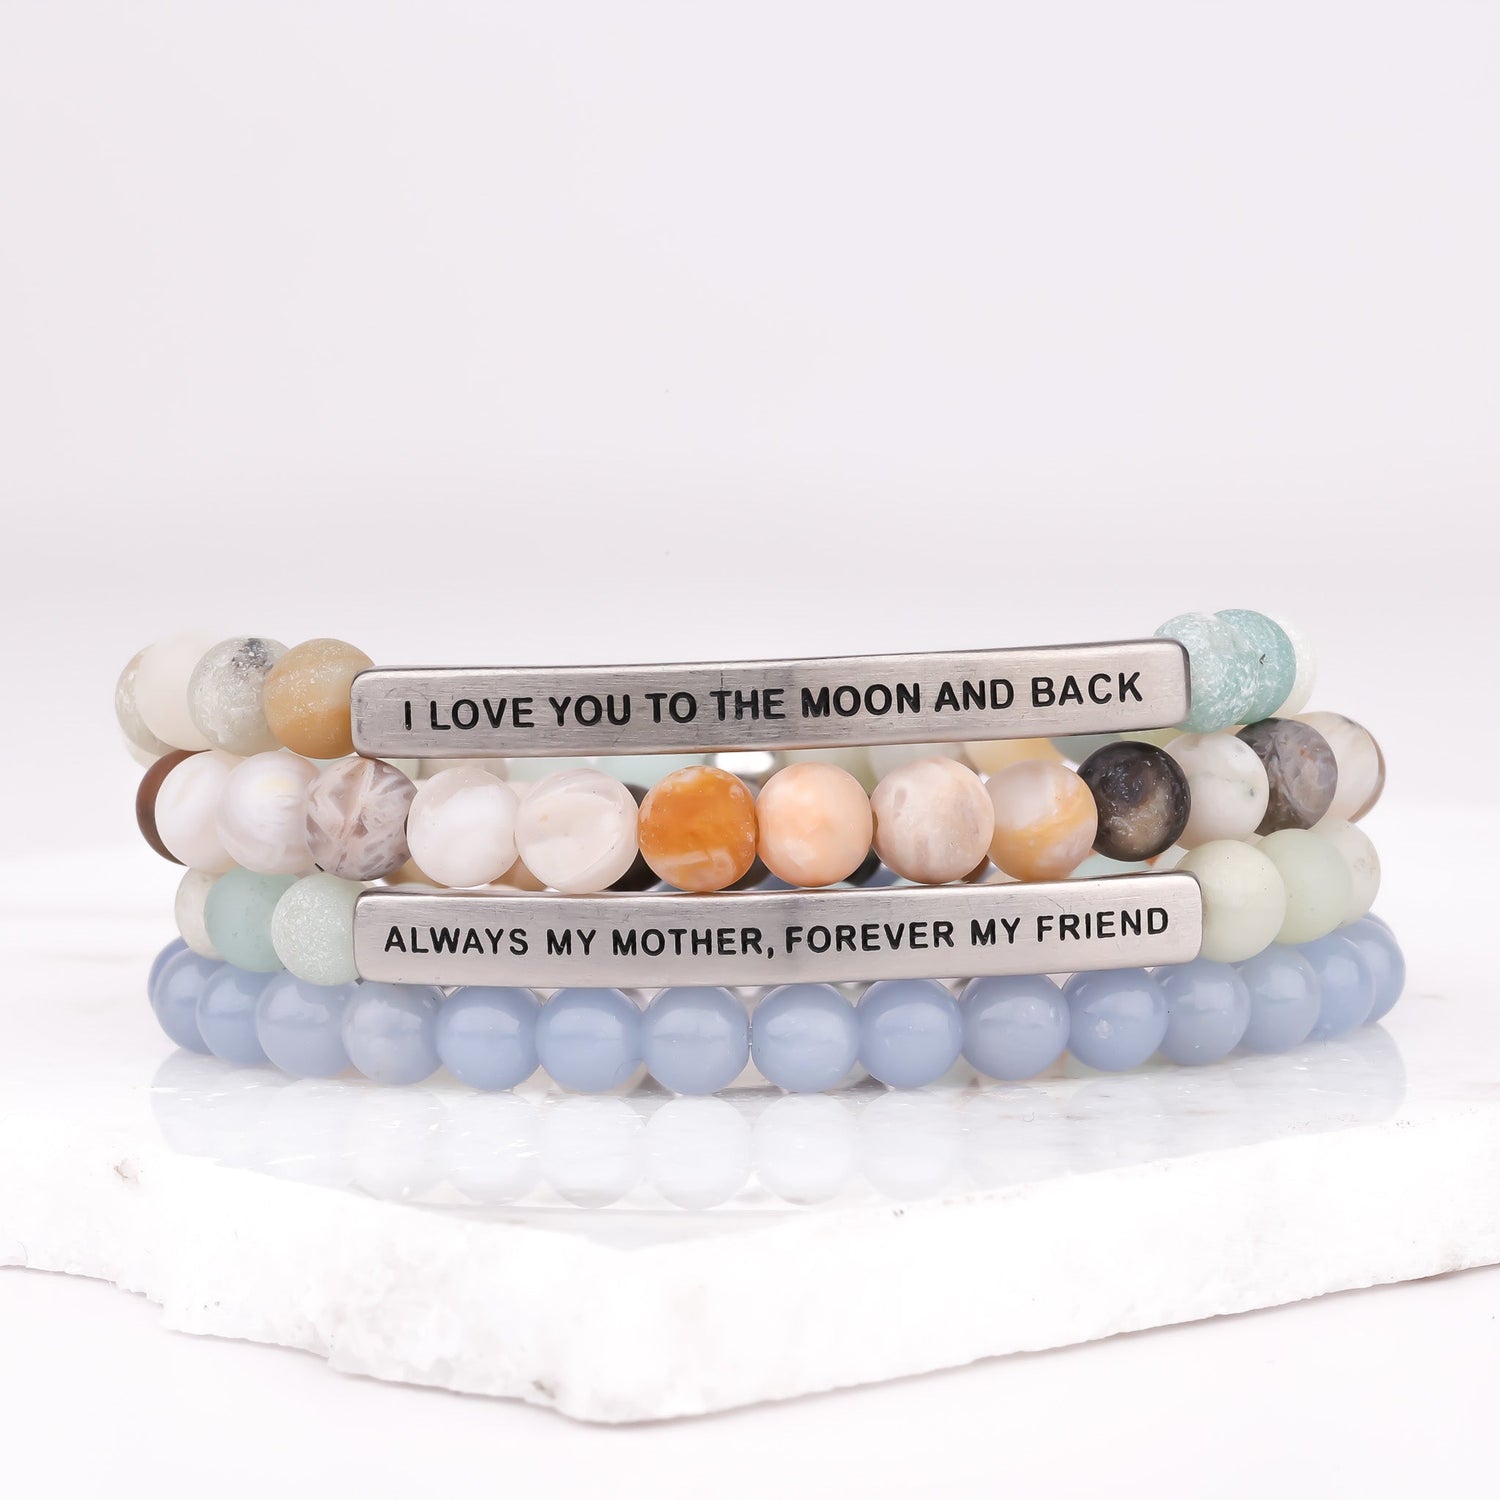 I LOVE YOU TO THE MOON AND BACK GIFT SET - AMAZONITE - Inspiration Co.